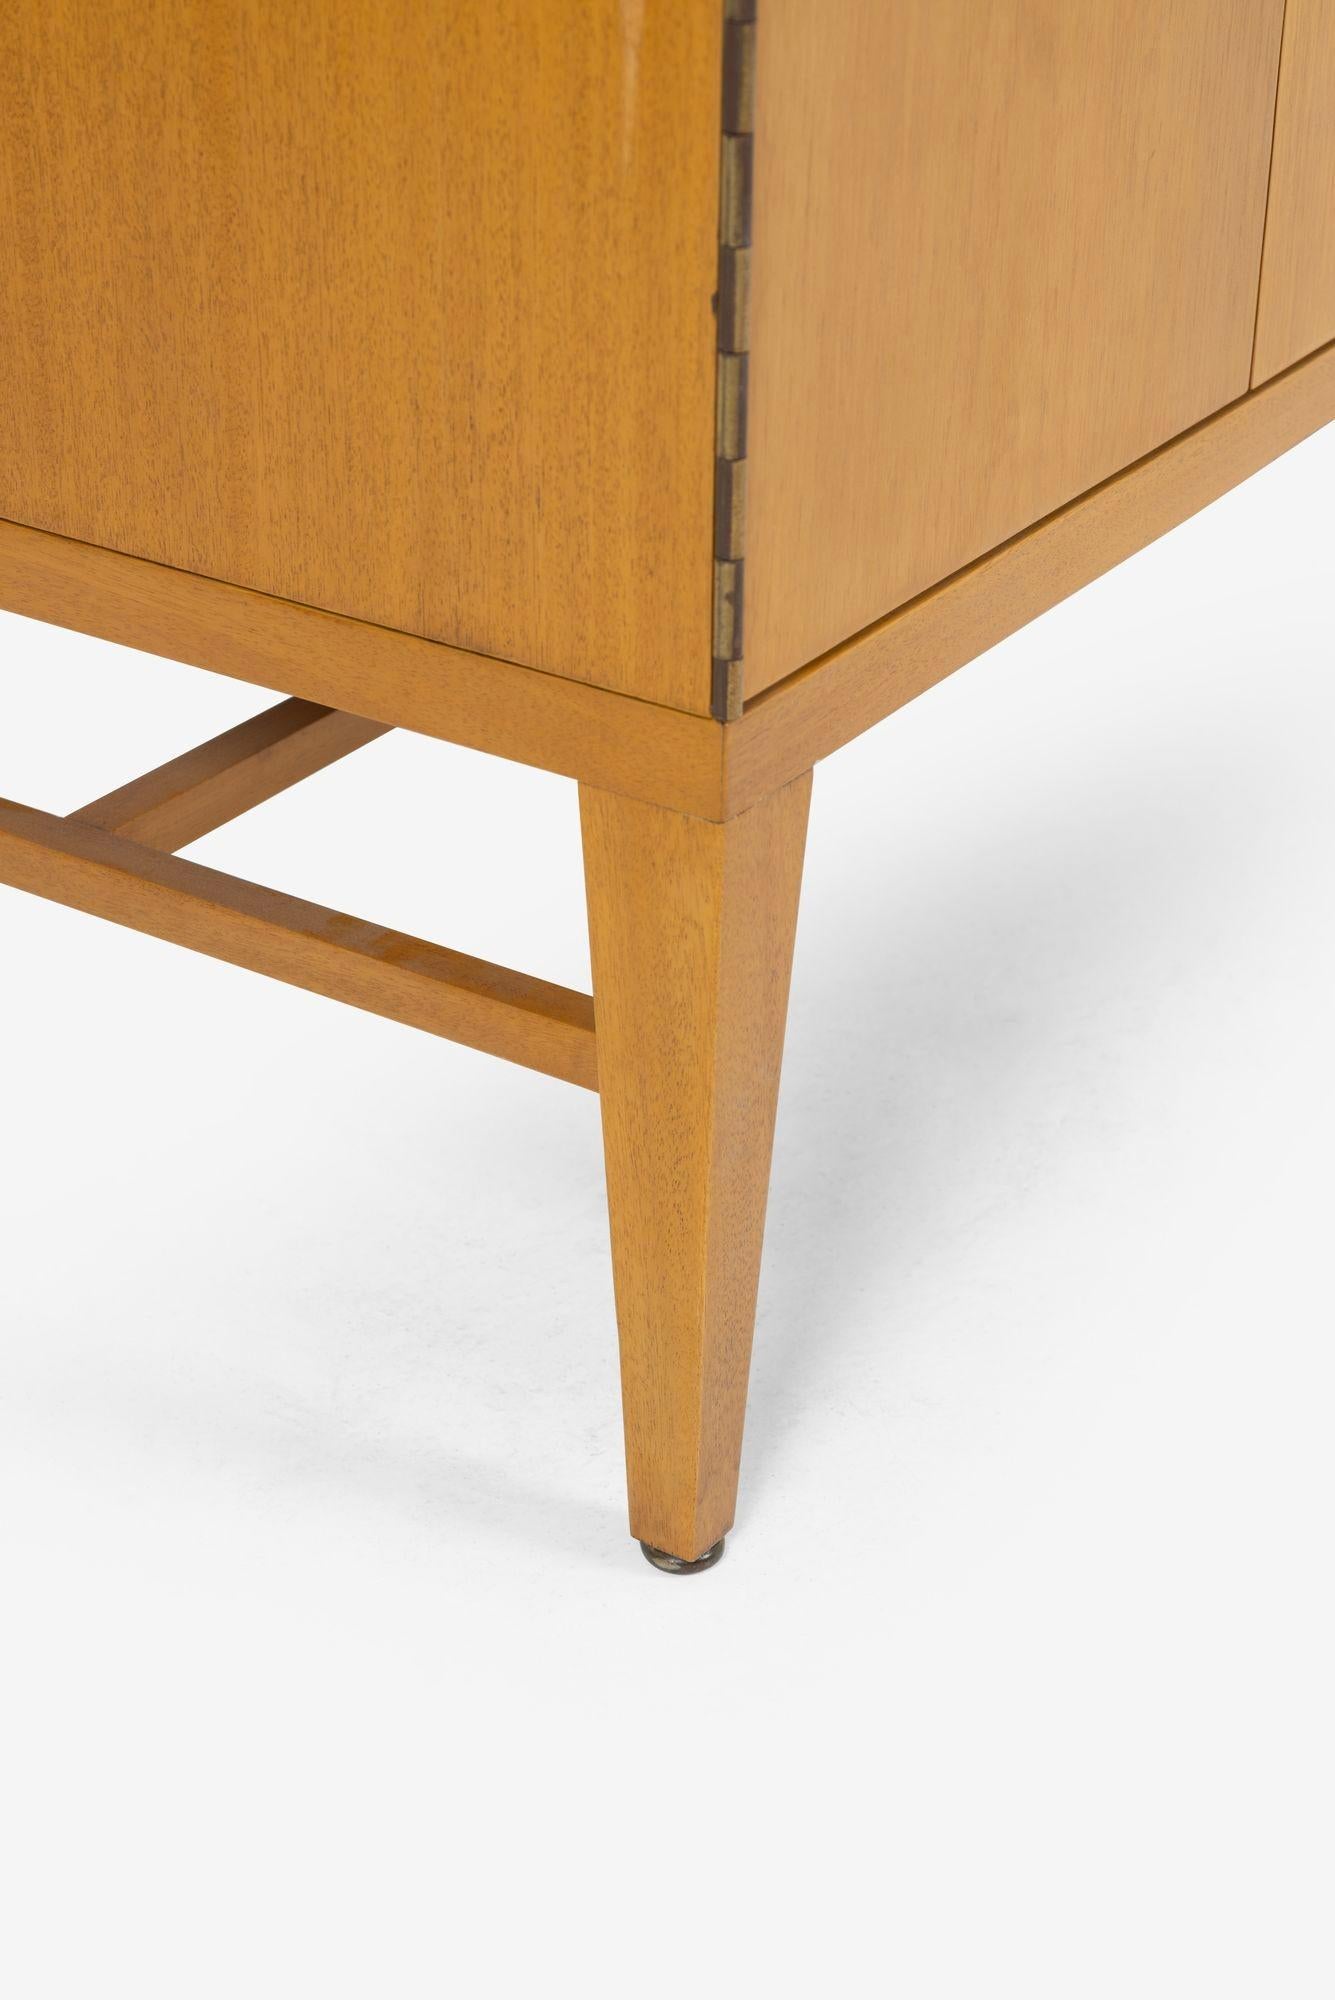 Mid-20th Century Paul McCobb Sideboard for Calvin For Sale